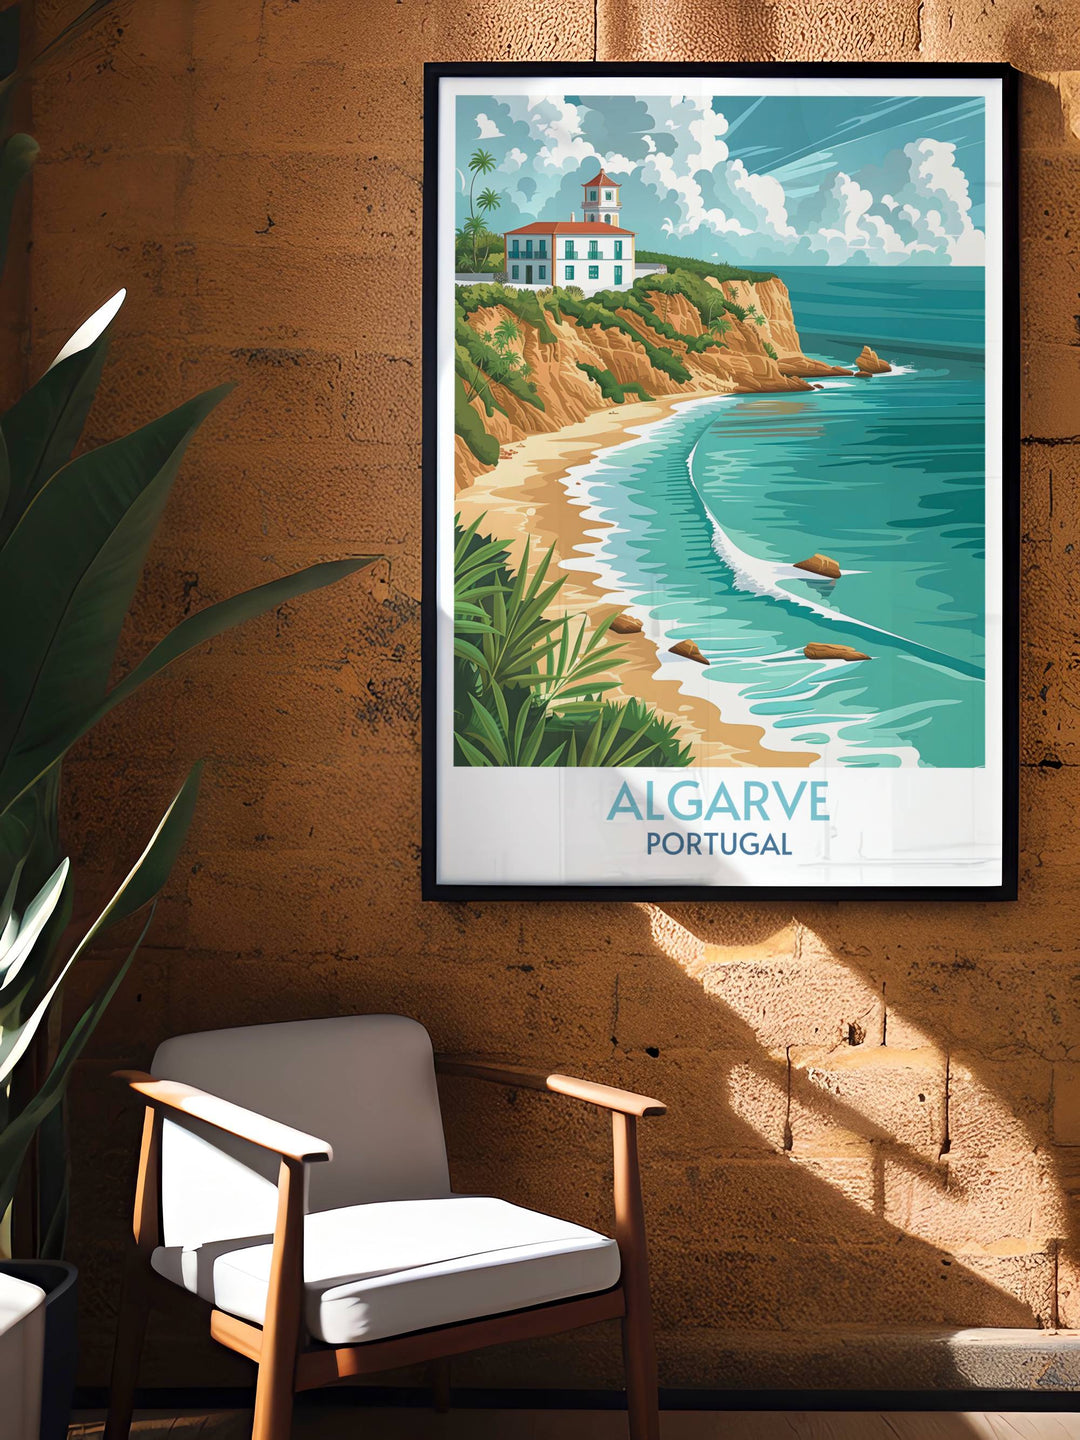 Algarve Beaches matted art print highlighting the picturesque scenery of Portugals stunning coastline. Ideal for enhancing your home decor with a touch of coastal elegance or as a special anniversary gift.